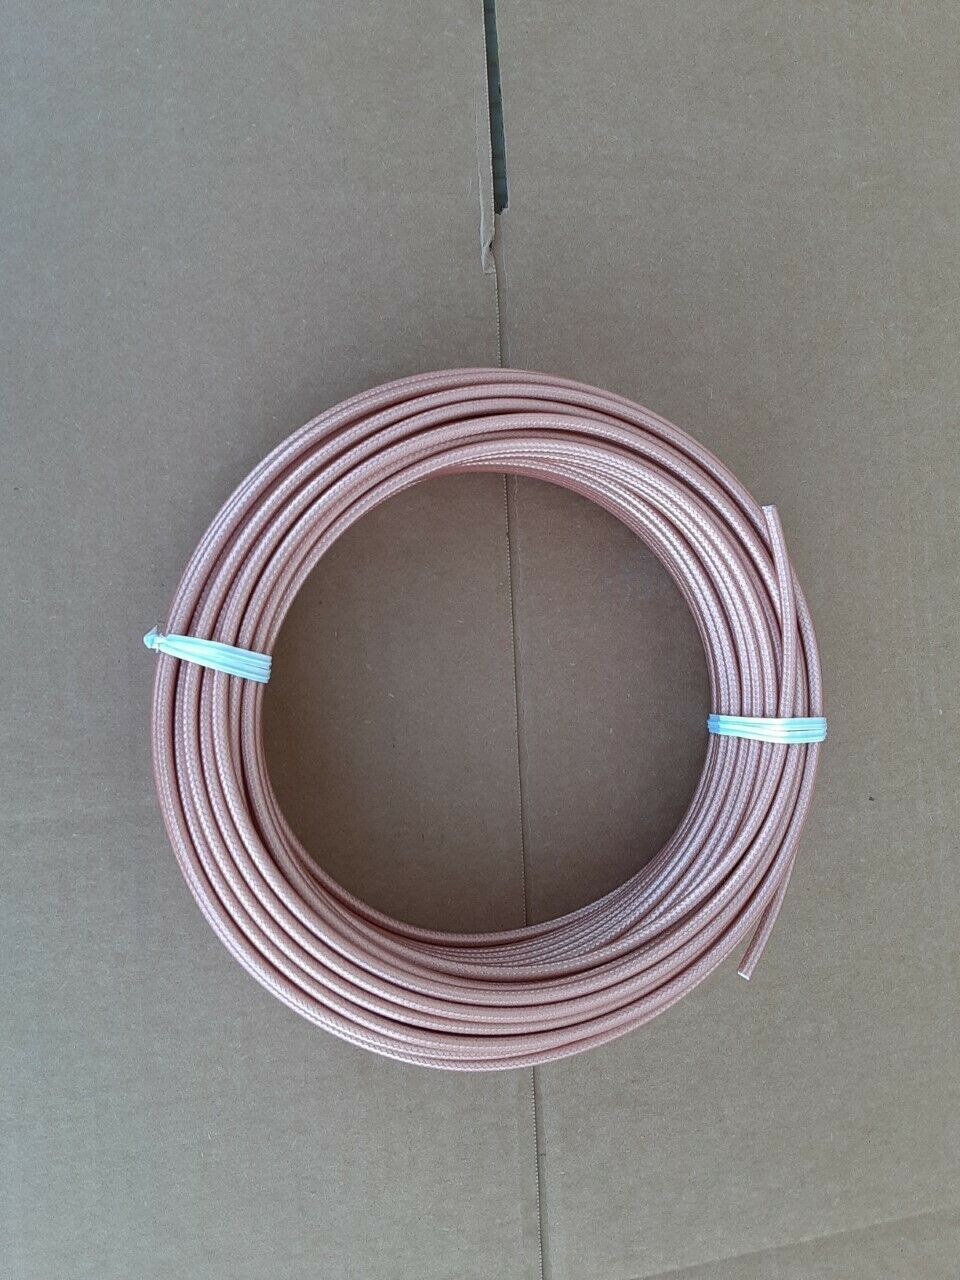 RG-400 Double Shielded Bulk 50 Ohm High Temperature Coax Cable 50 FT